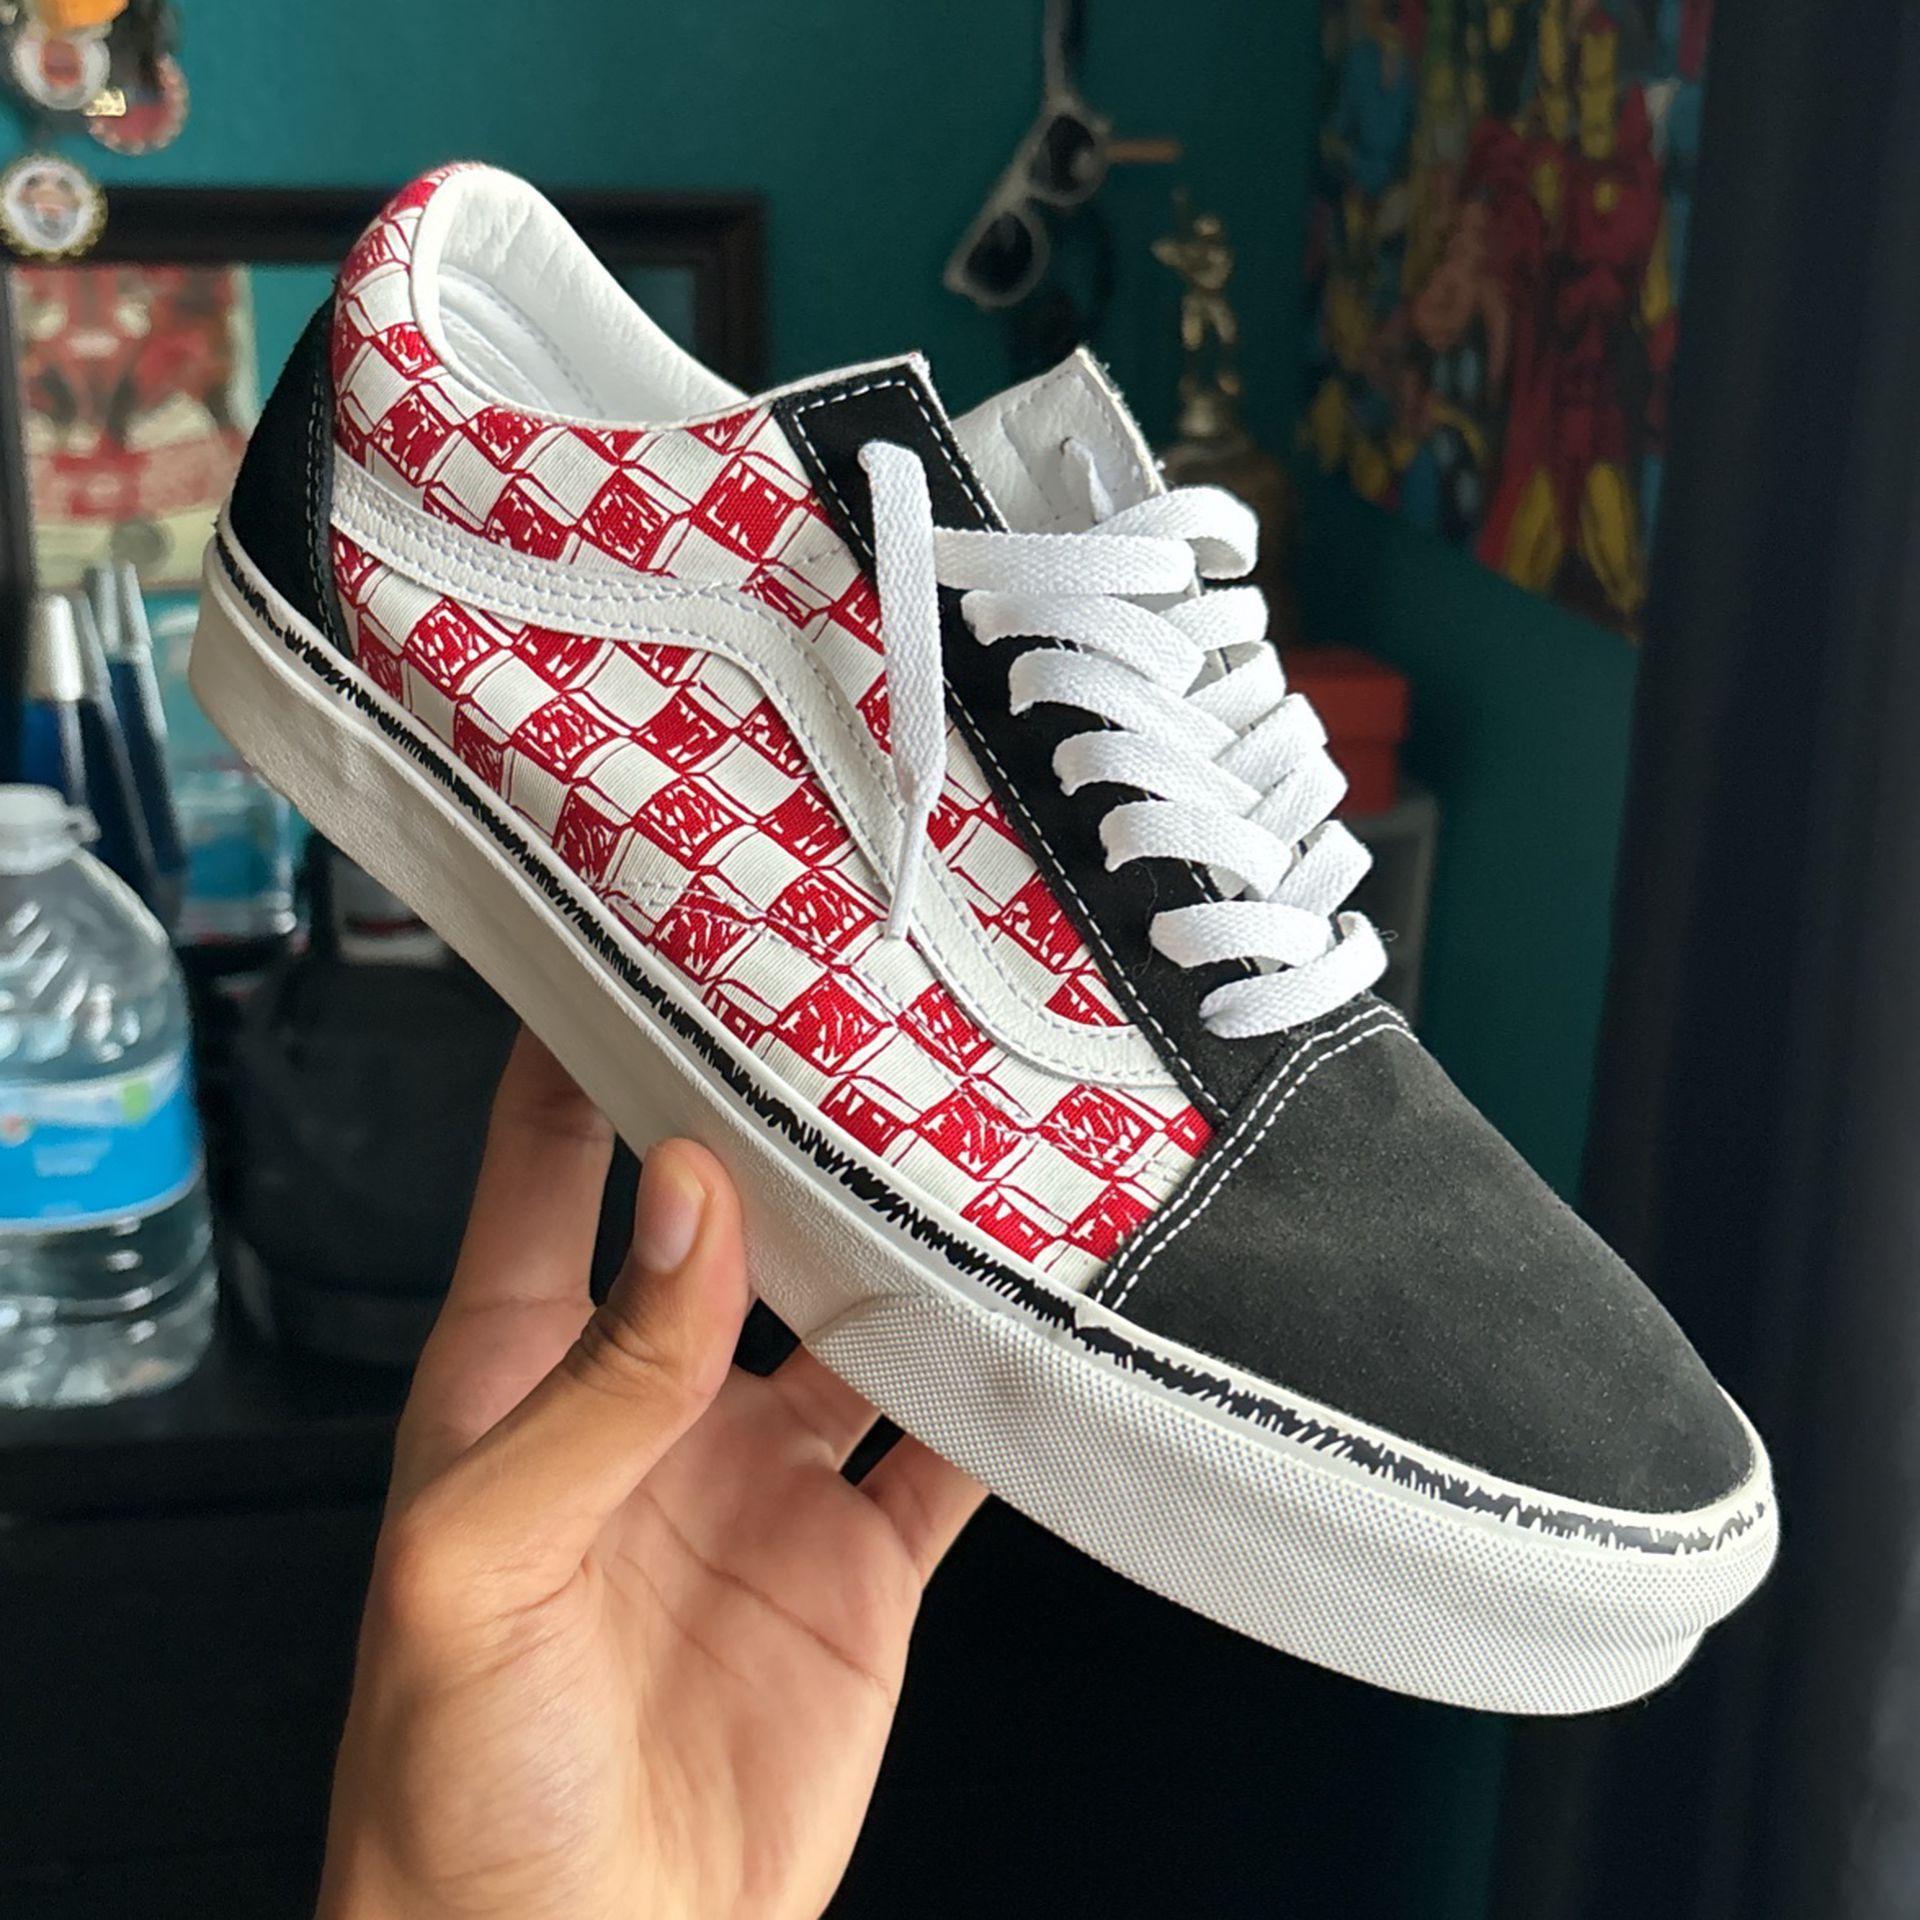 Used Classic Vans SIZE 12